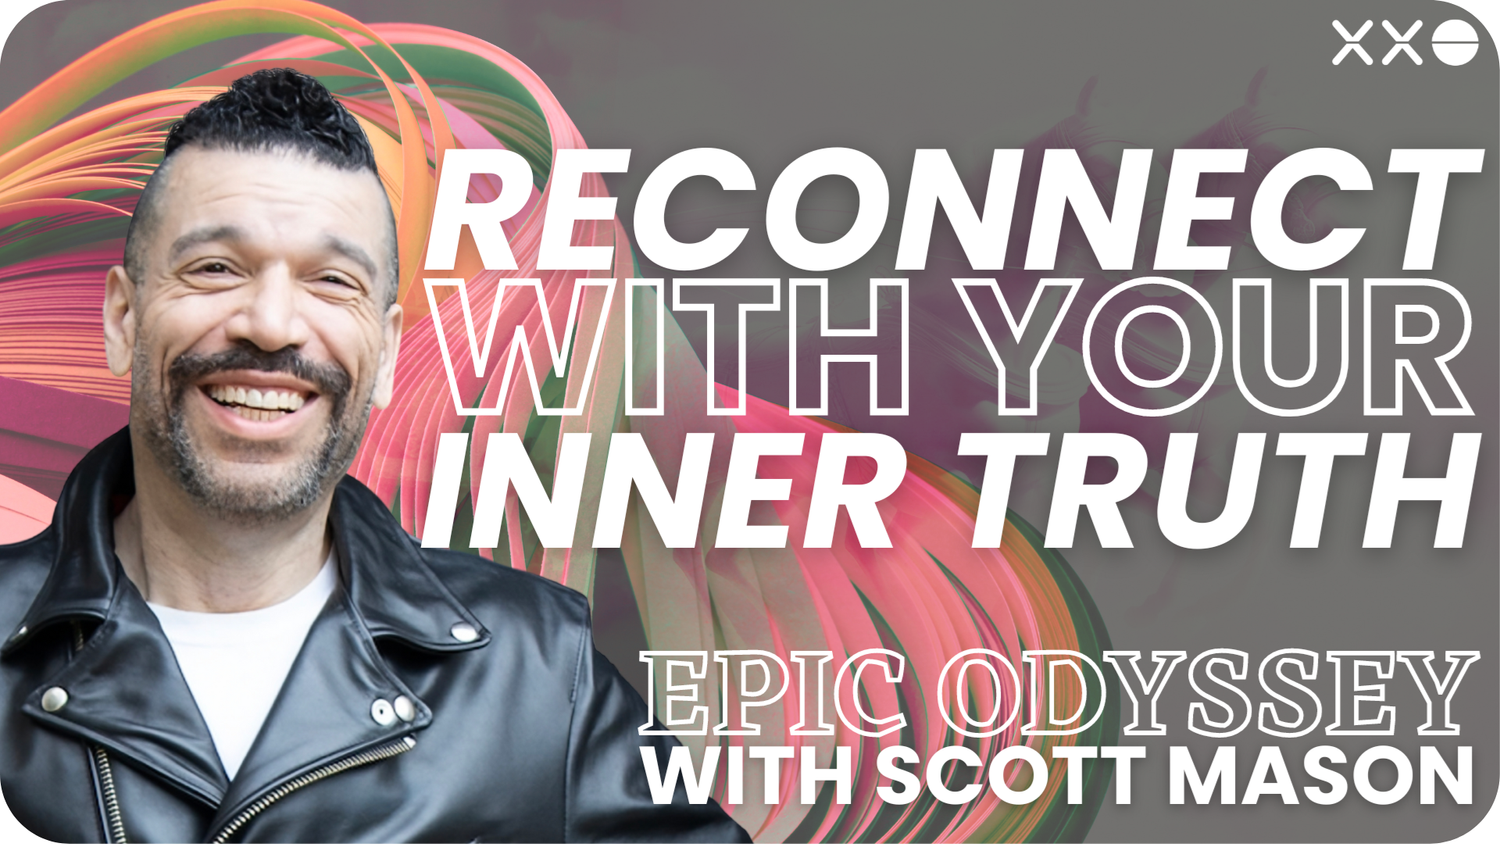 SCOTT+MASON+XXO+CONNECT+EXPERIENCE+ROOM+RECONNECT+WITH+YOUR+INNER+TRUTH.png